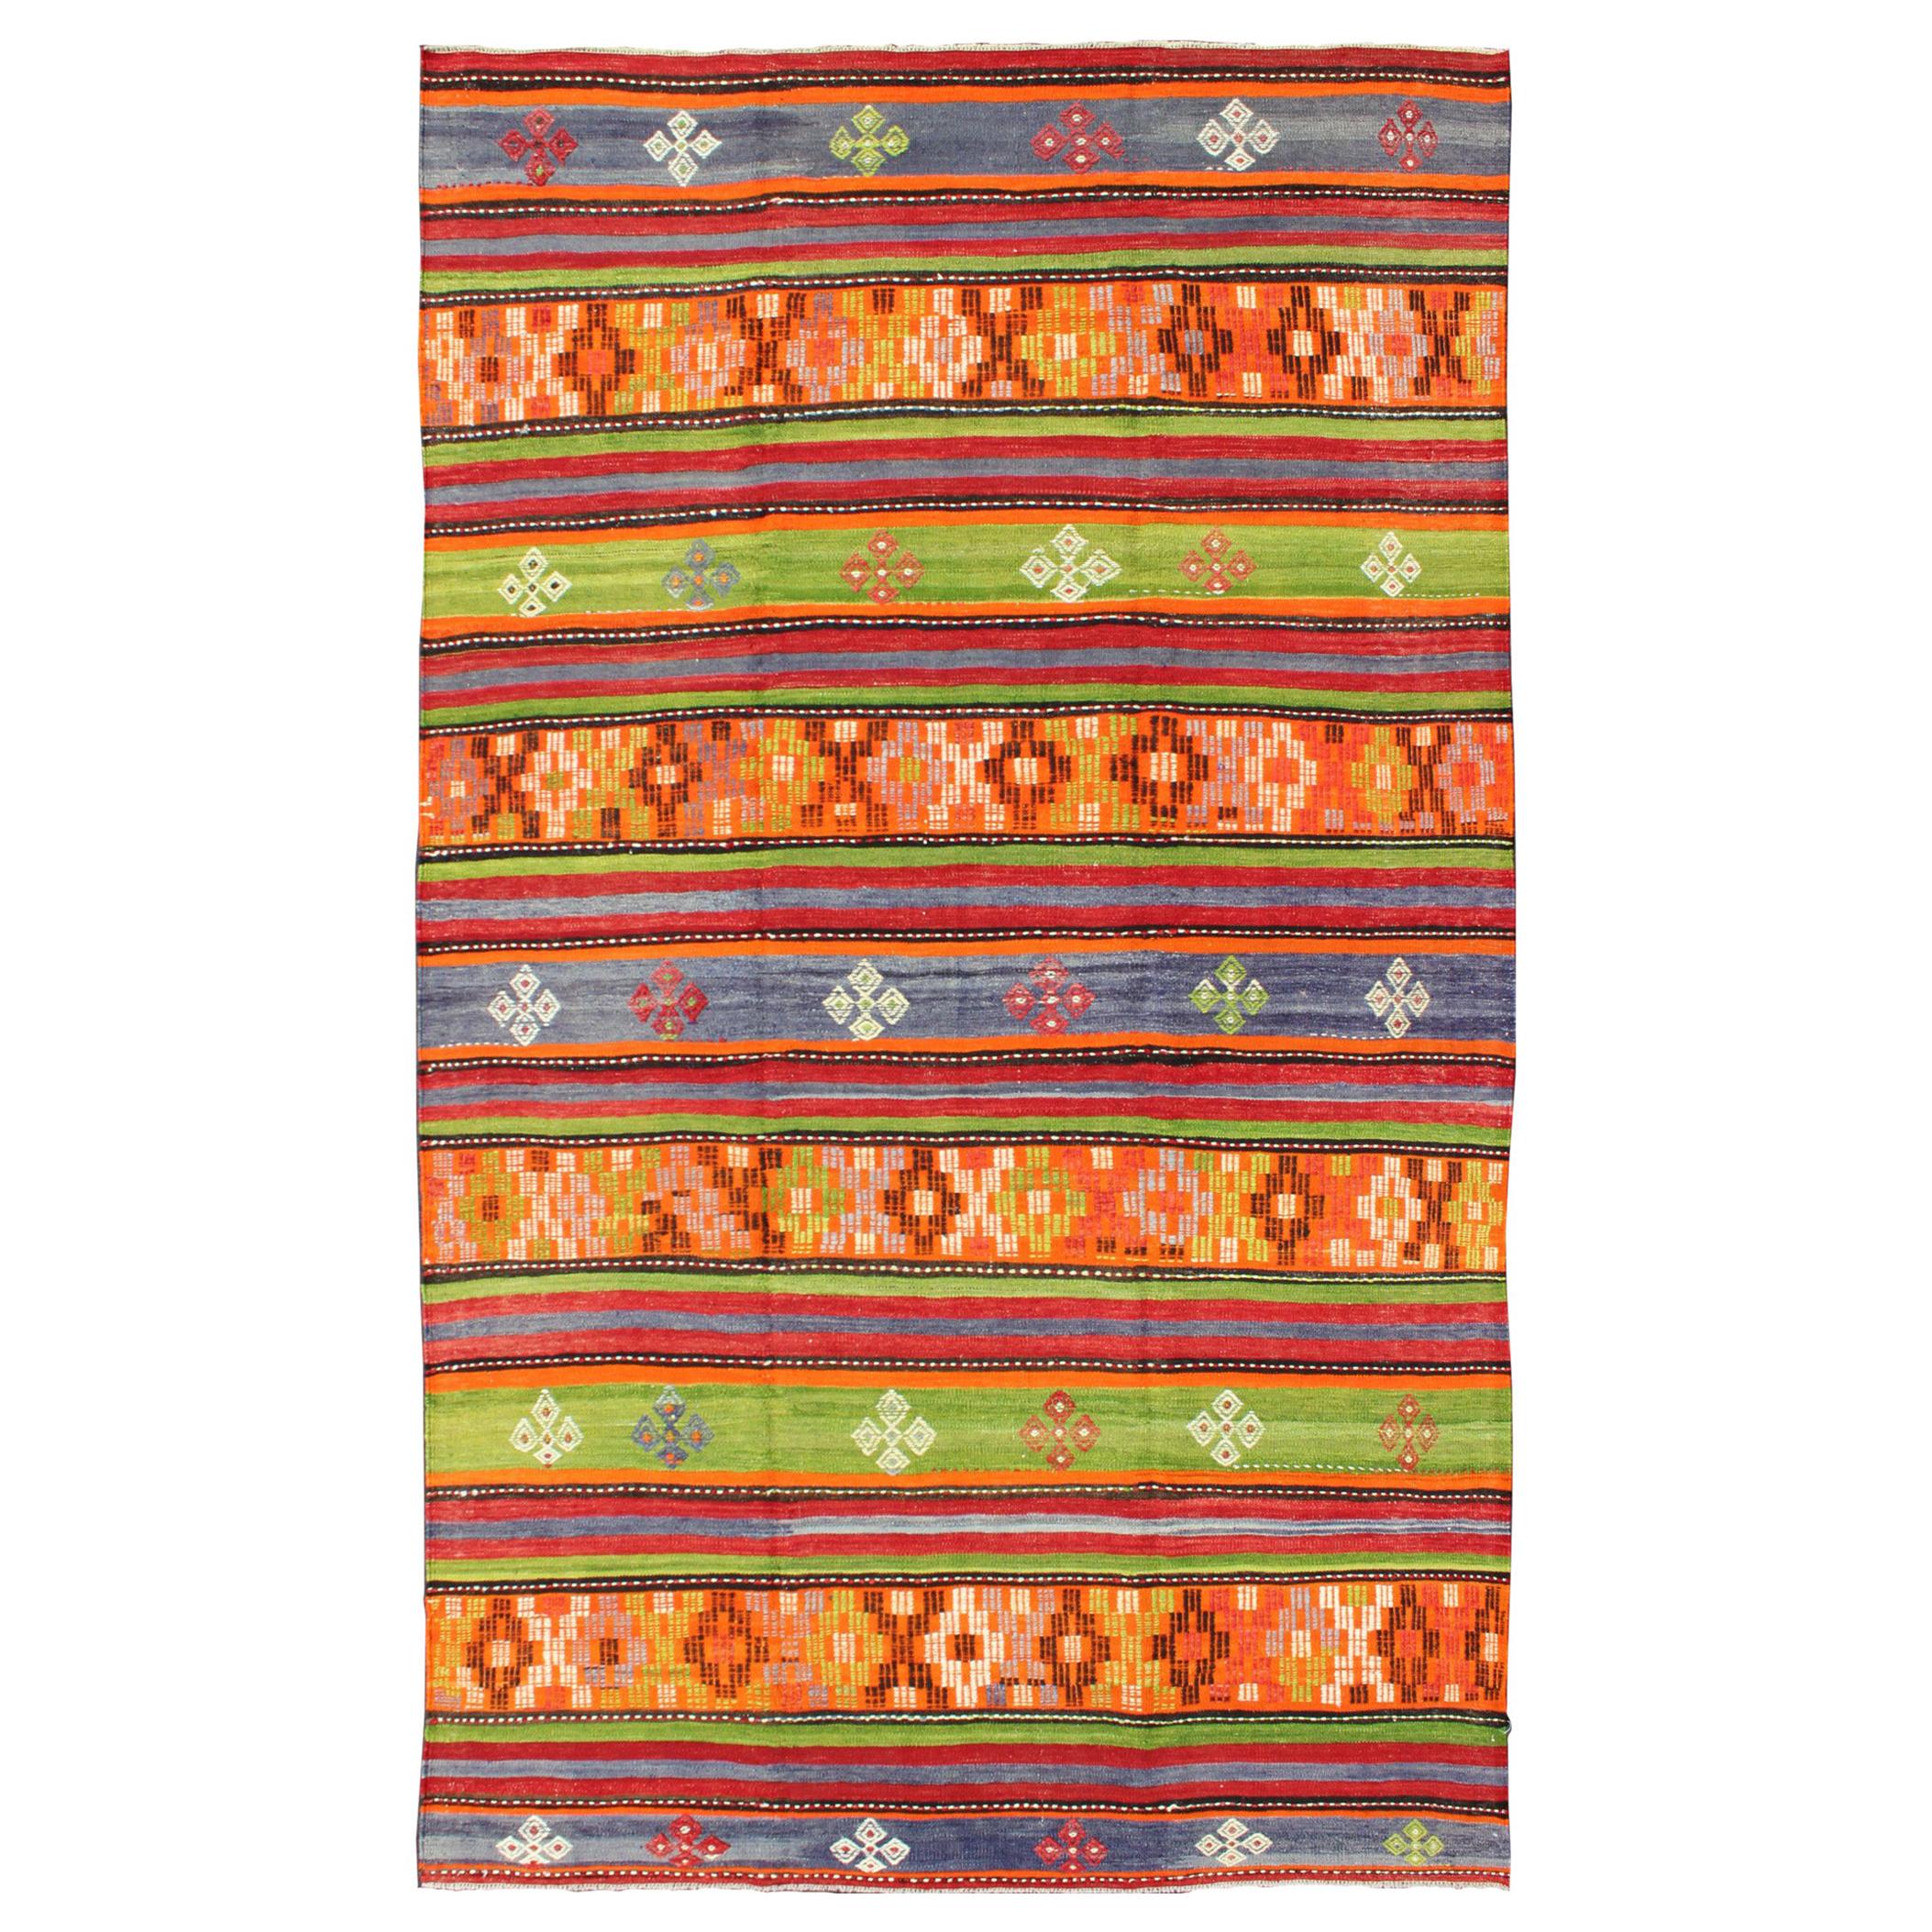  Colorful and Bright Turkish Kilim Rug with Stripe Geometric Design For Sale